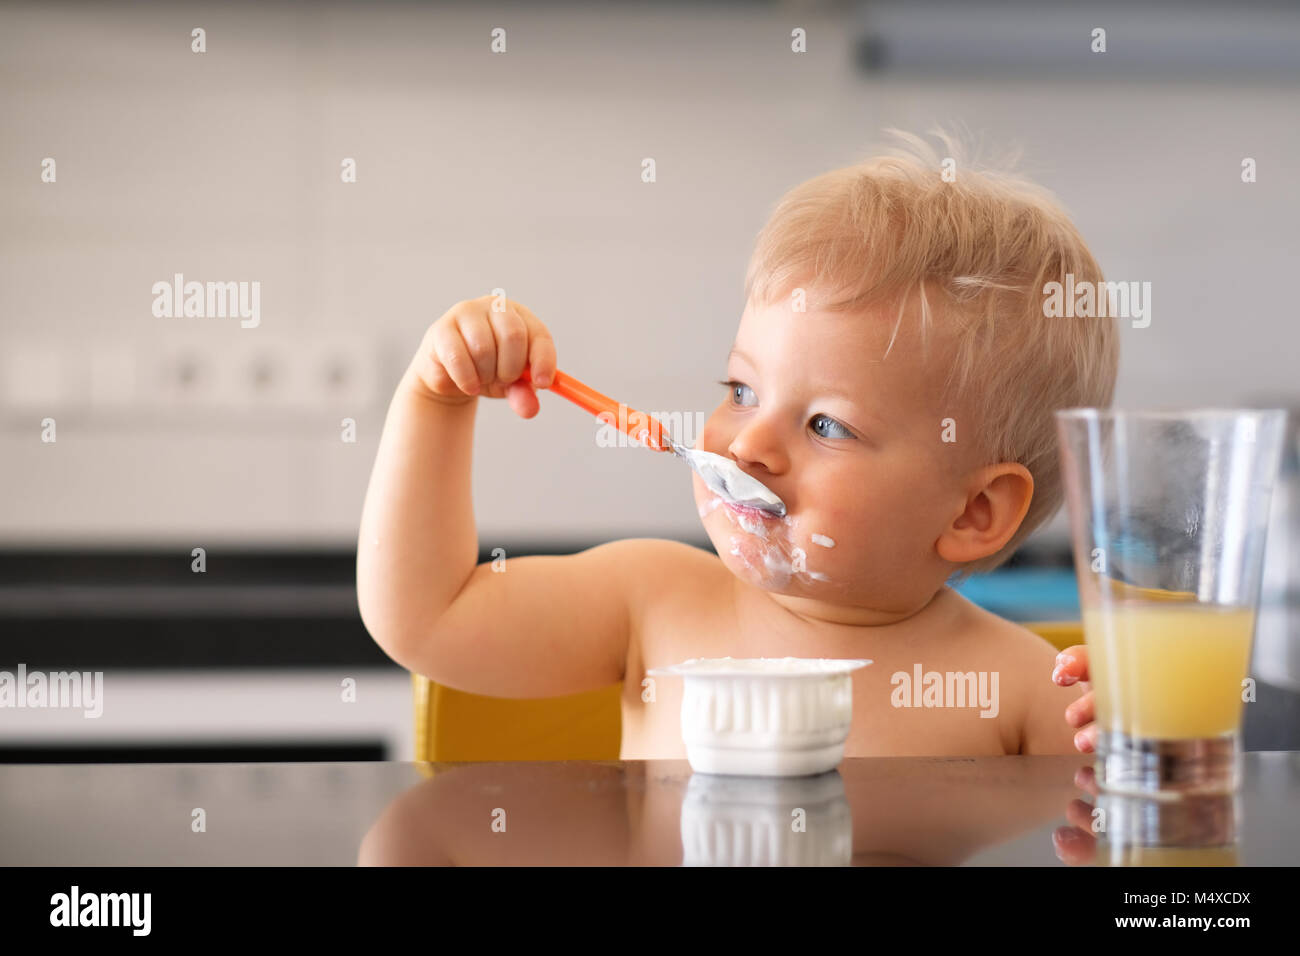 Adorable one year old baby boy eating yoghurt with spoon Stock Photo